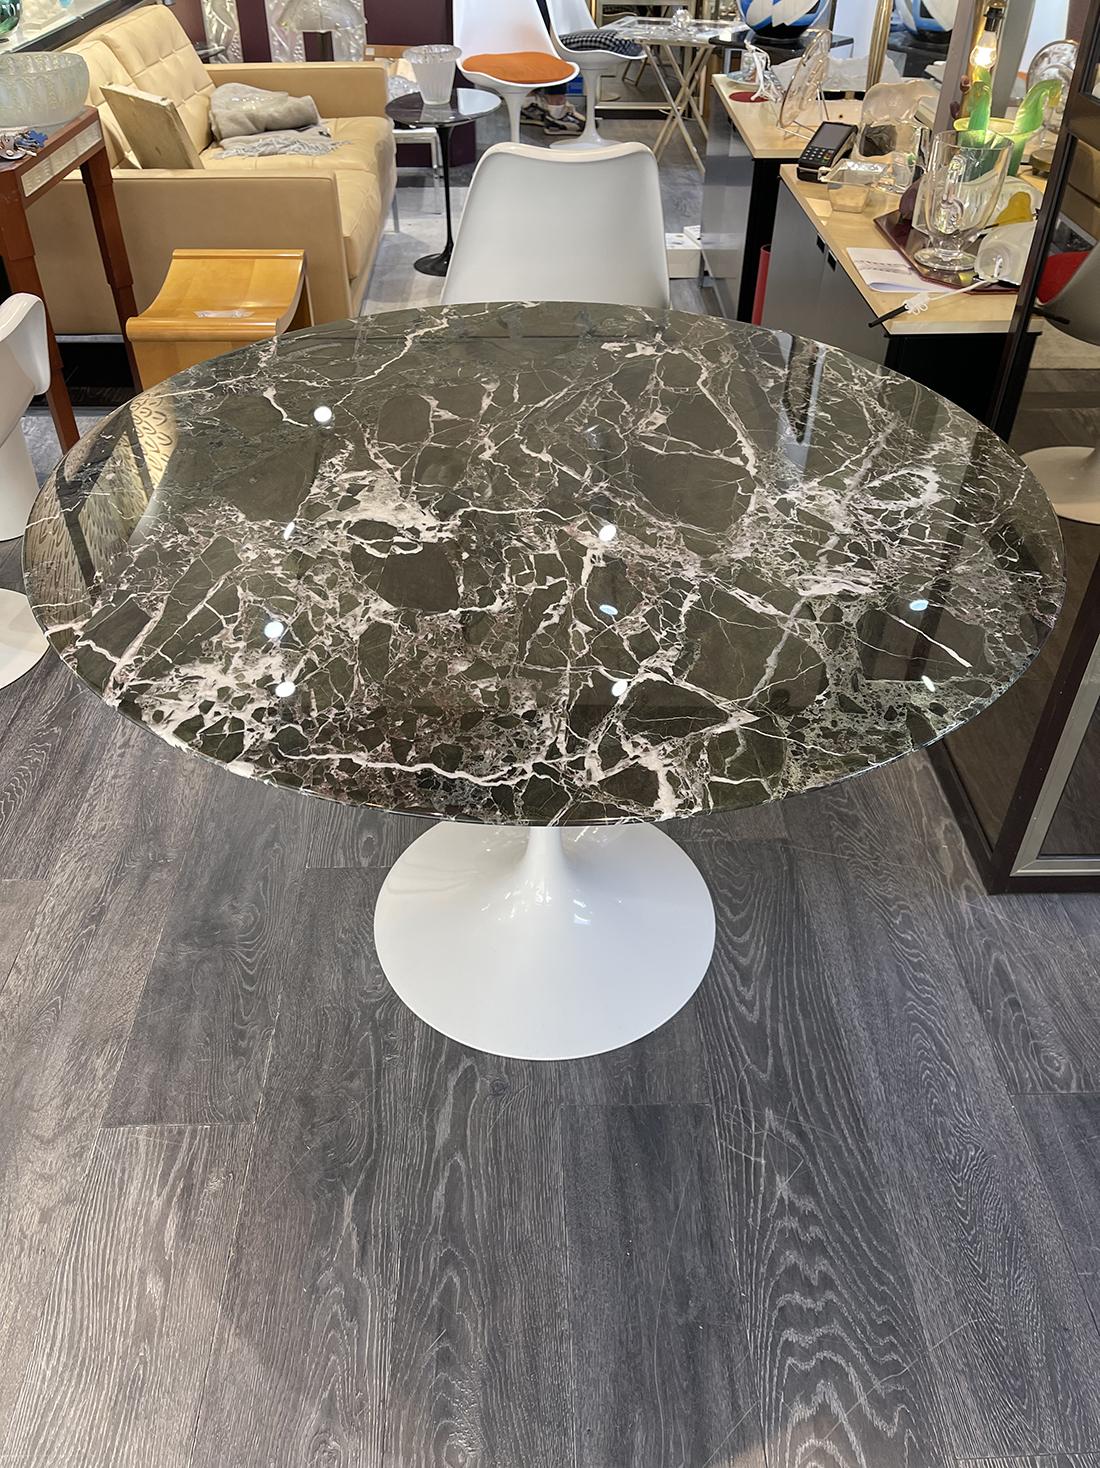 Eero Saarinen for KNOLL International,
Dining table,
White lacquered cast aluminum tulip base,
Marble top:green imperial .

Marked under the base. Diameter : 107cm height. : 72cm.

New condition

More photos on request.

